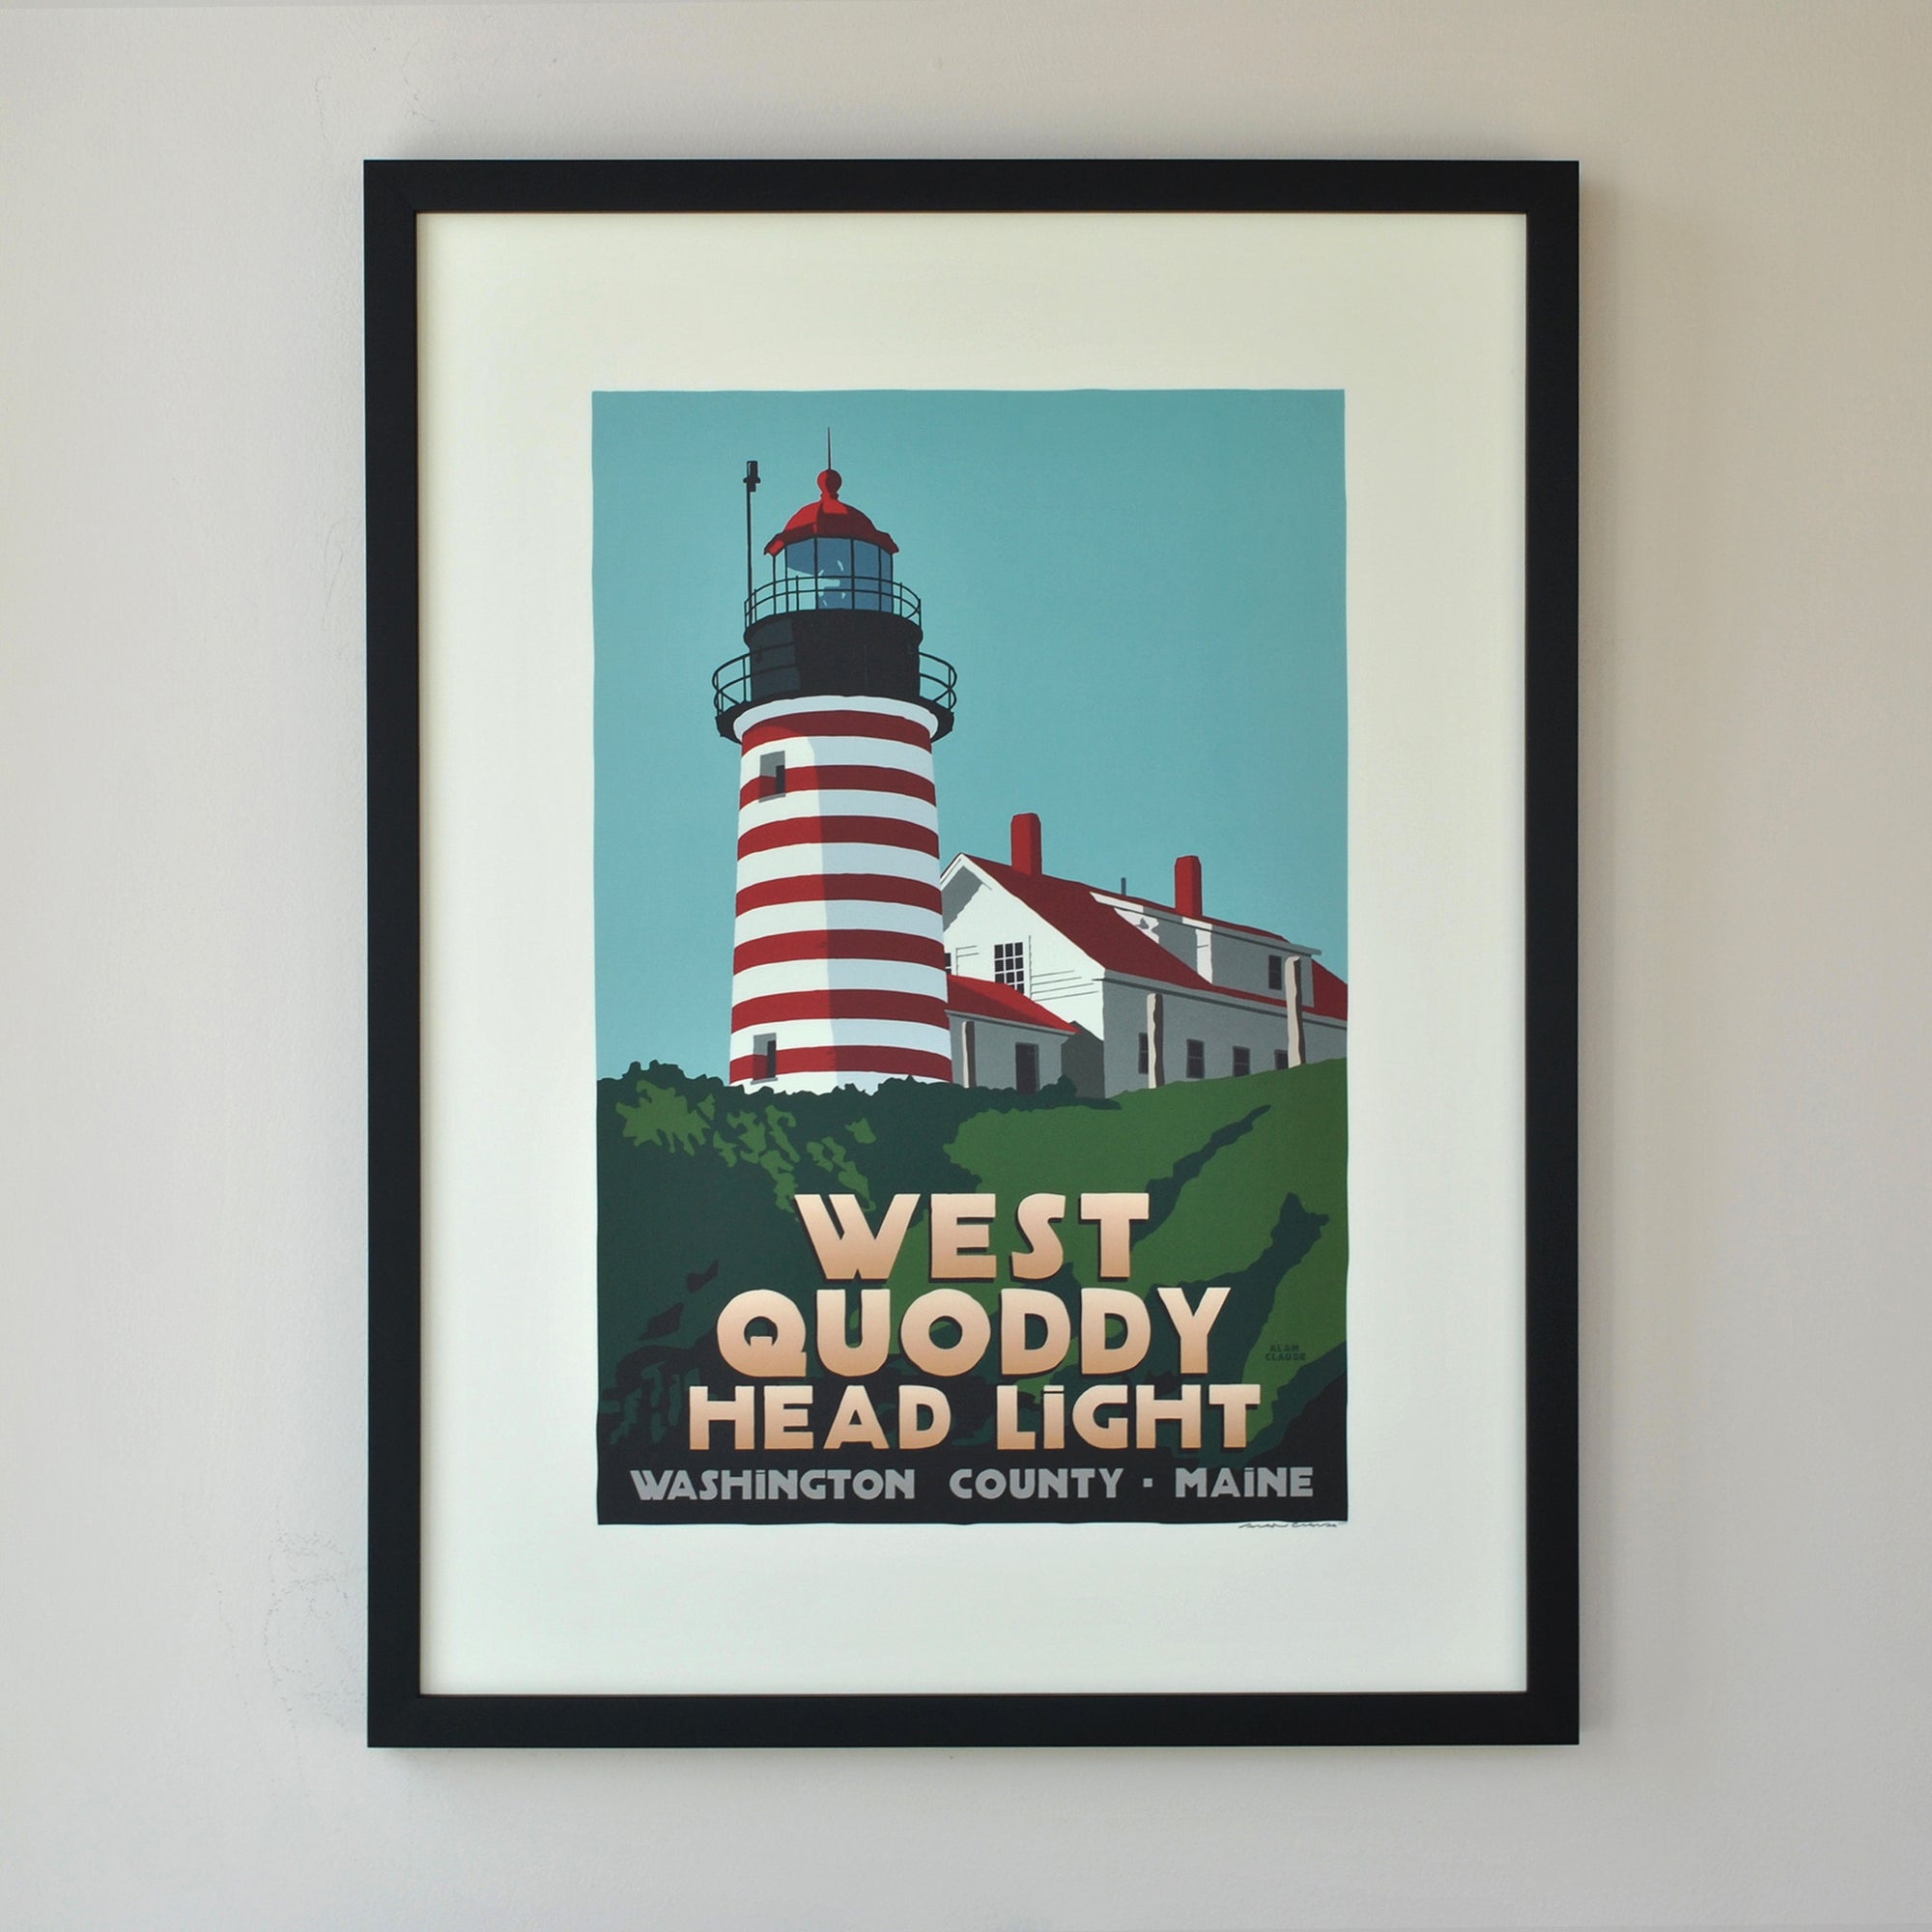 West Quoddy Head Light Art Print 18" x 24" Framed Travel Poster By Alan Claude - Maine